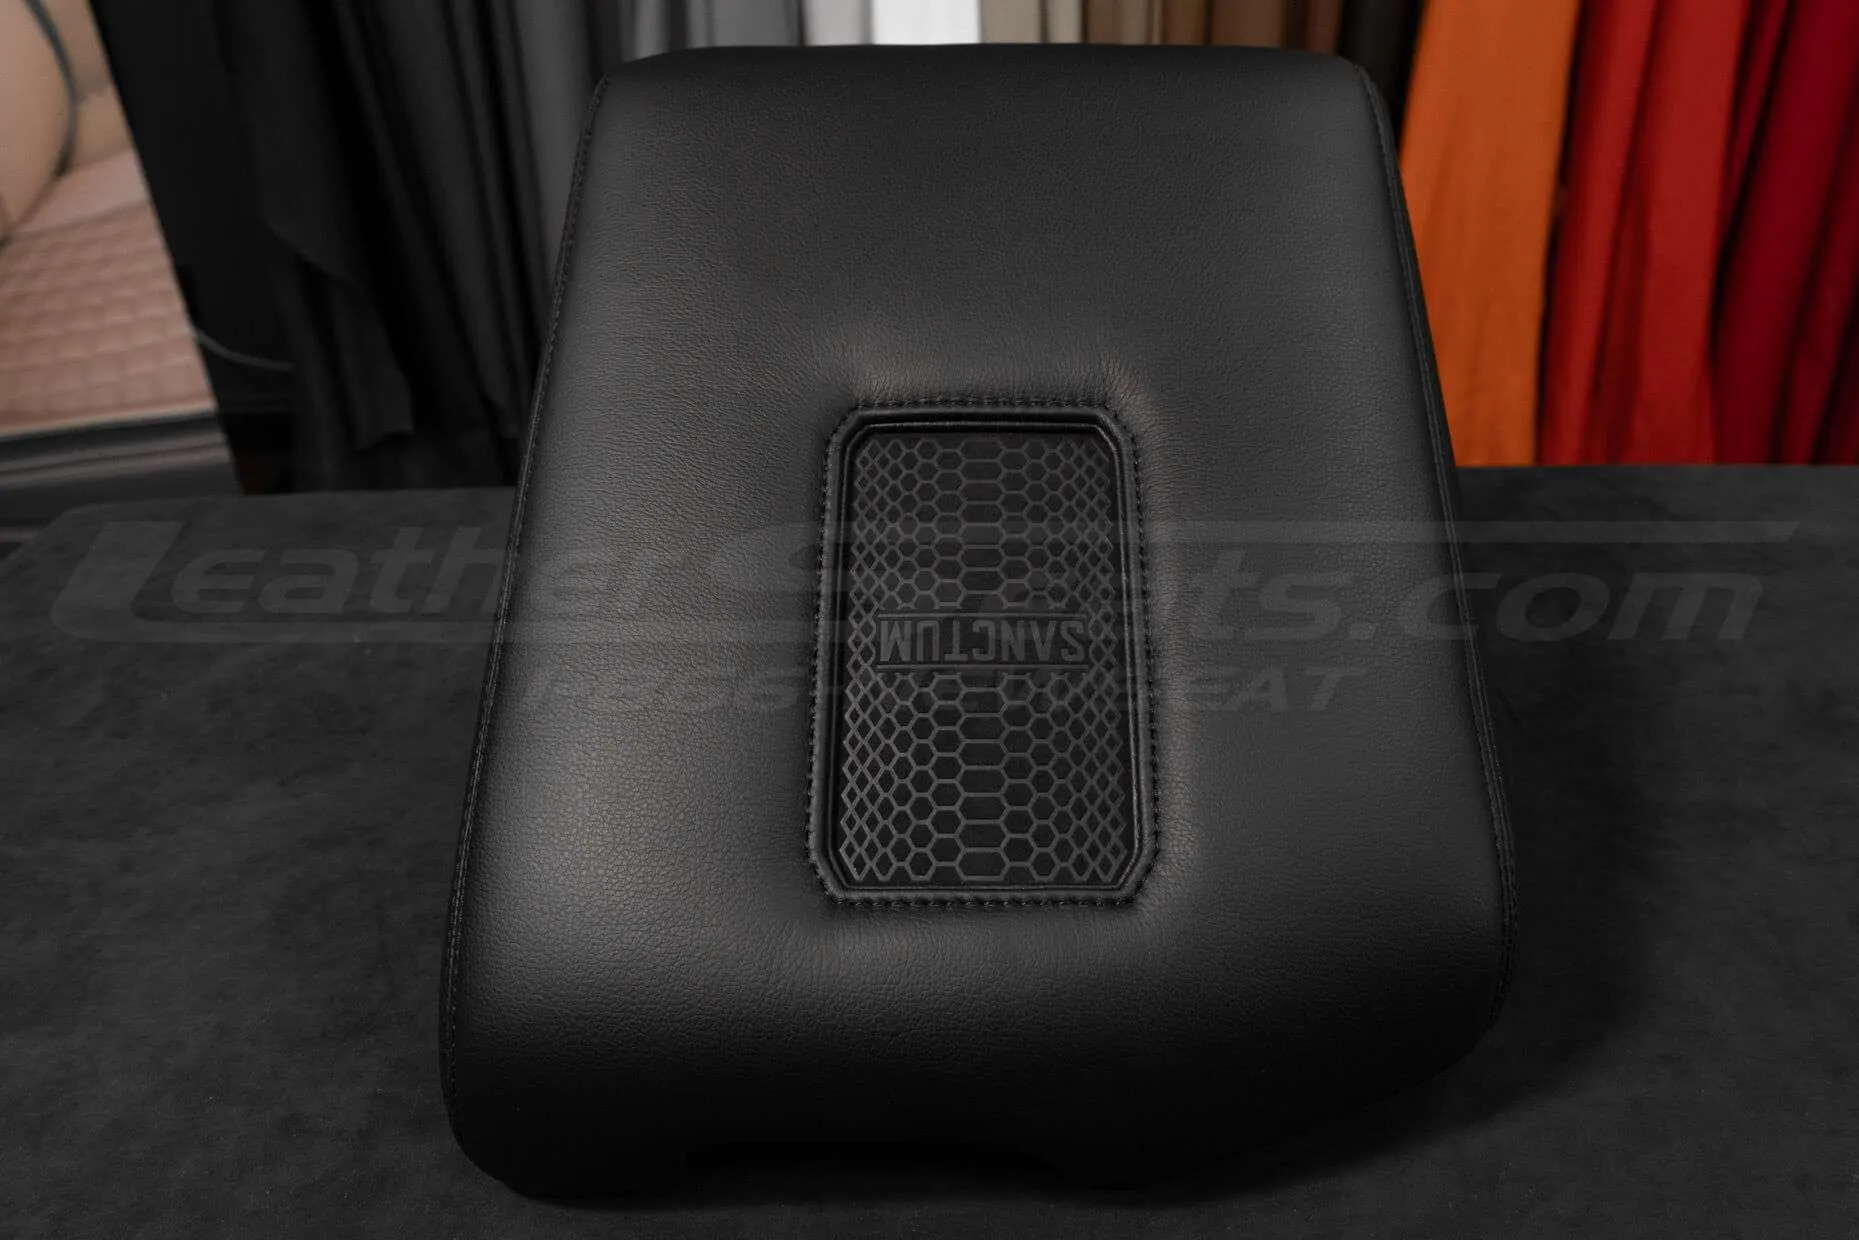 Sanctum Wireless Center Charging Console for Toyota Sequoia in Black leather